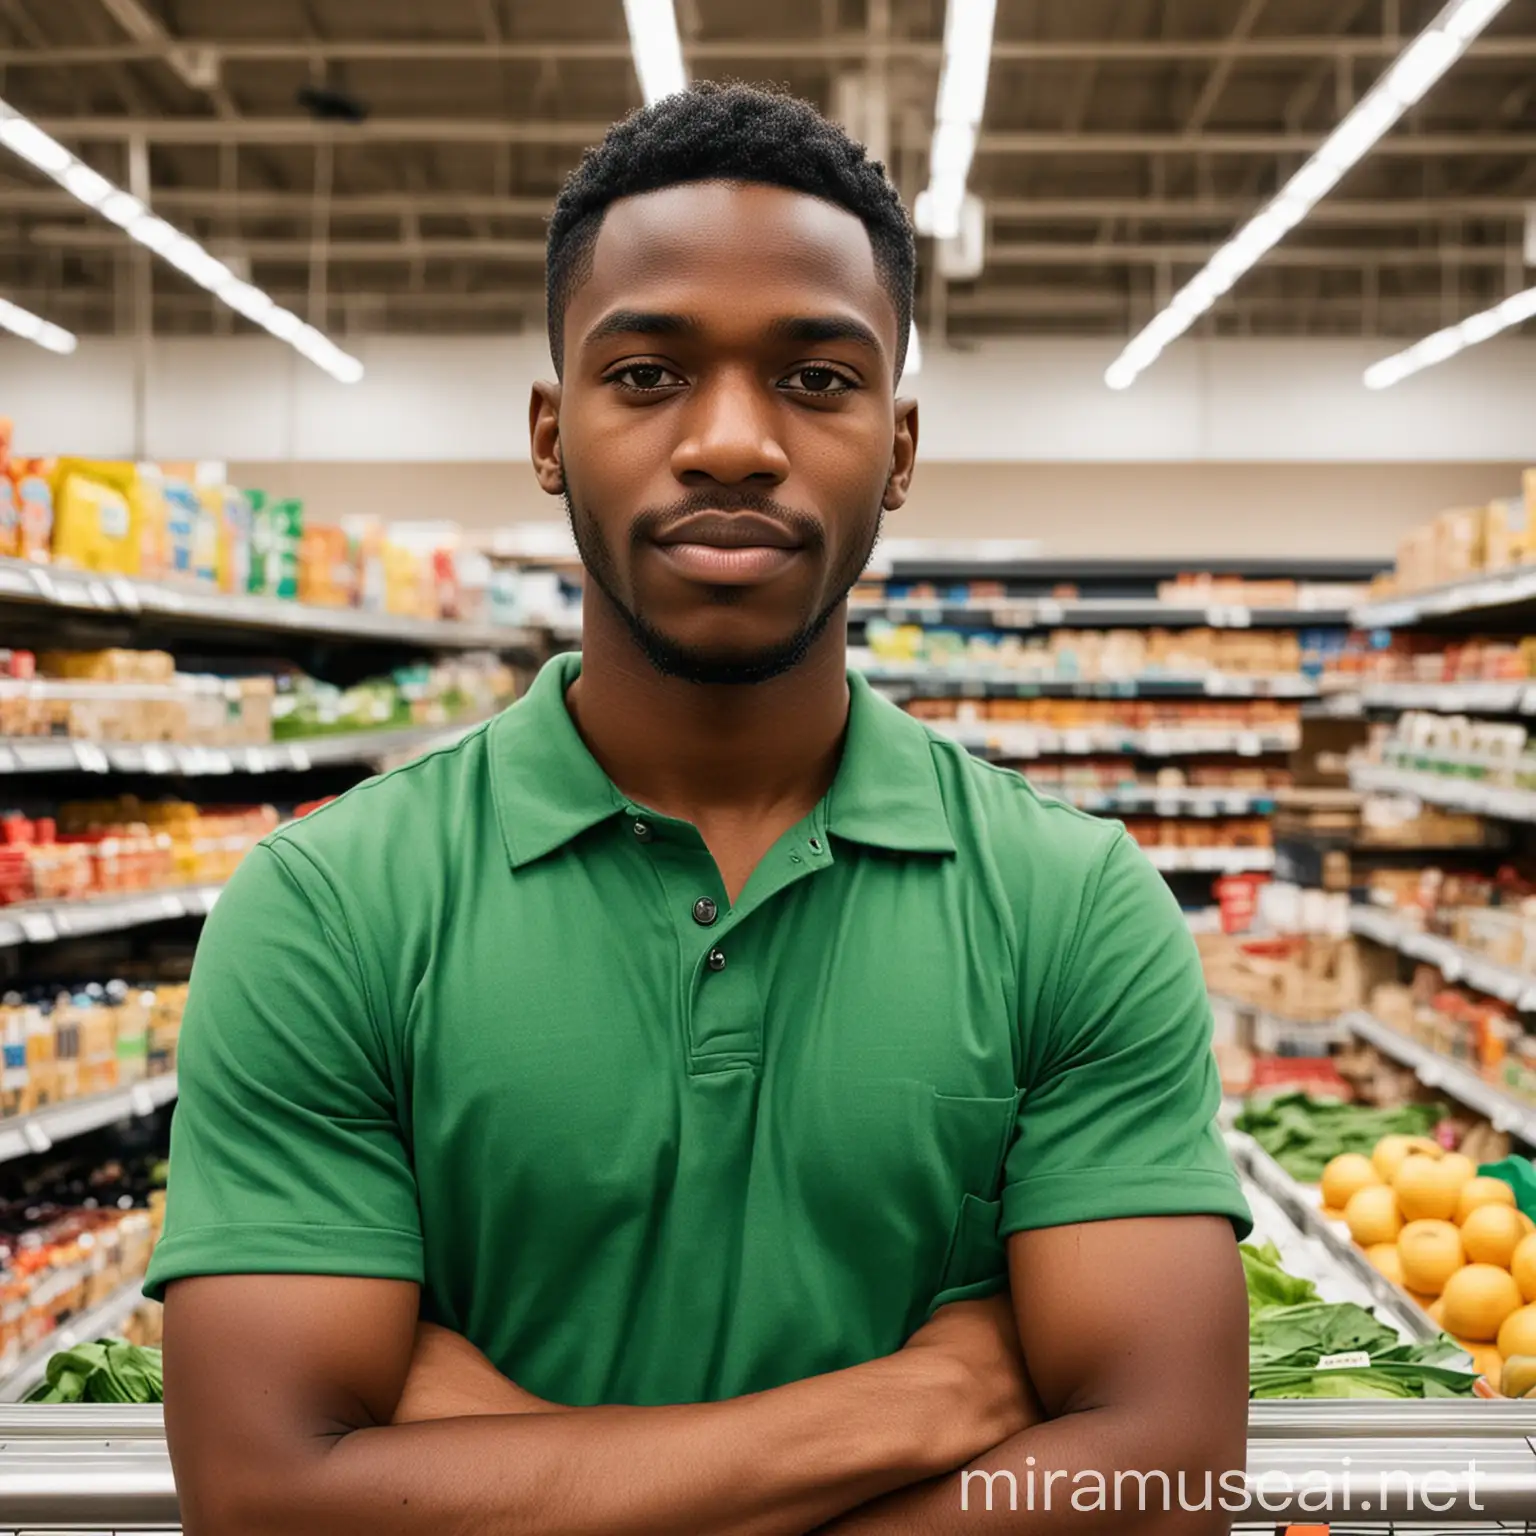 
I NEED A PHOTO OF A BLACK MALE WORKER WITH ARMS CROSSED IN A SUPERMARKET WEARING A GREEN SHIRT